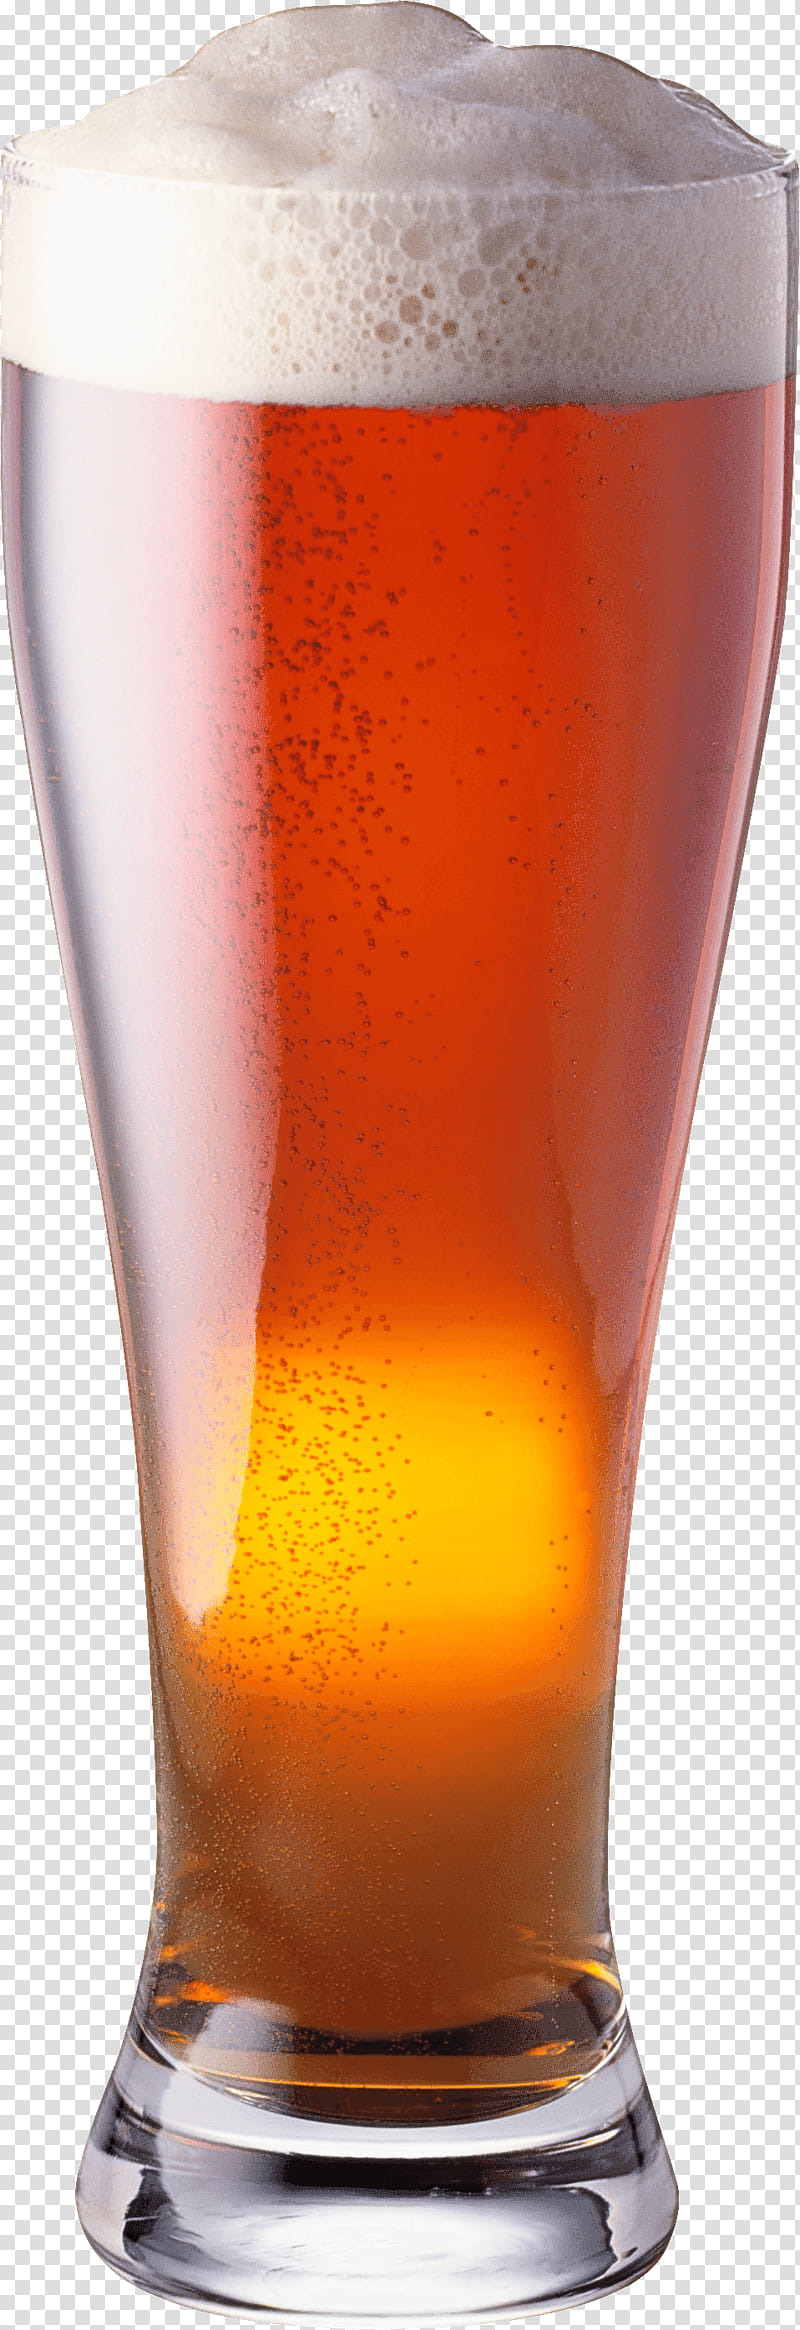 beer glass pint glass drink beer lager, Alcoholic Beverage, Wheat Beer, Drinkware, Caramel Color transparent background PNG clipart